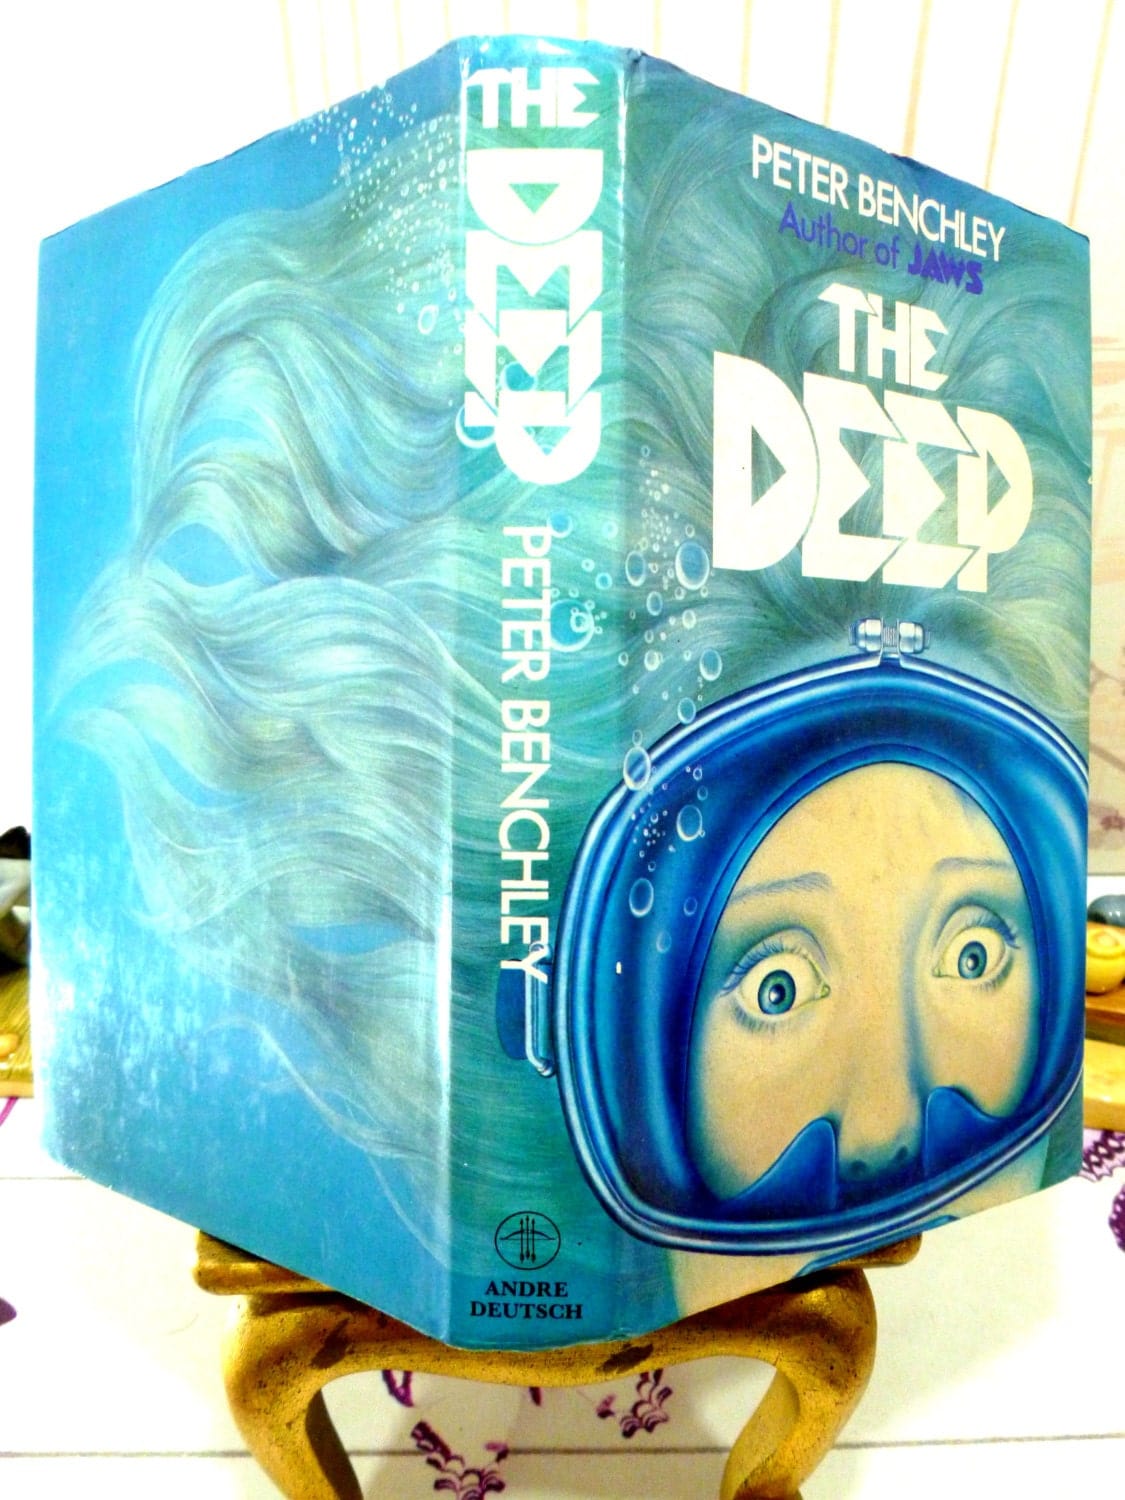 Vintage Hardback Book The Deep by Jaws Author Peter Benchley 1970s 1st Ed First Printing Hardback